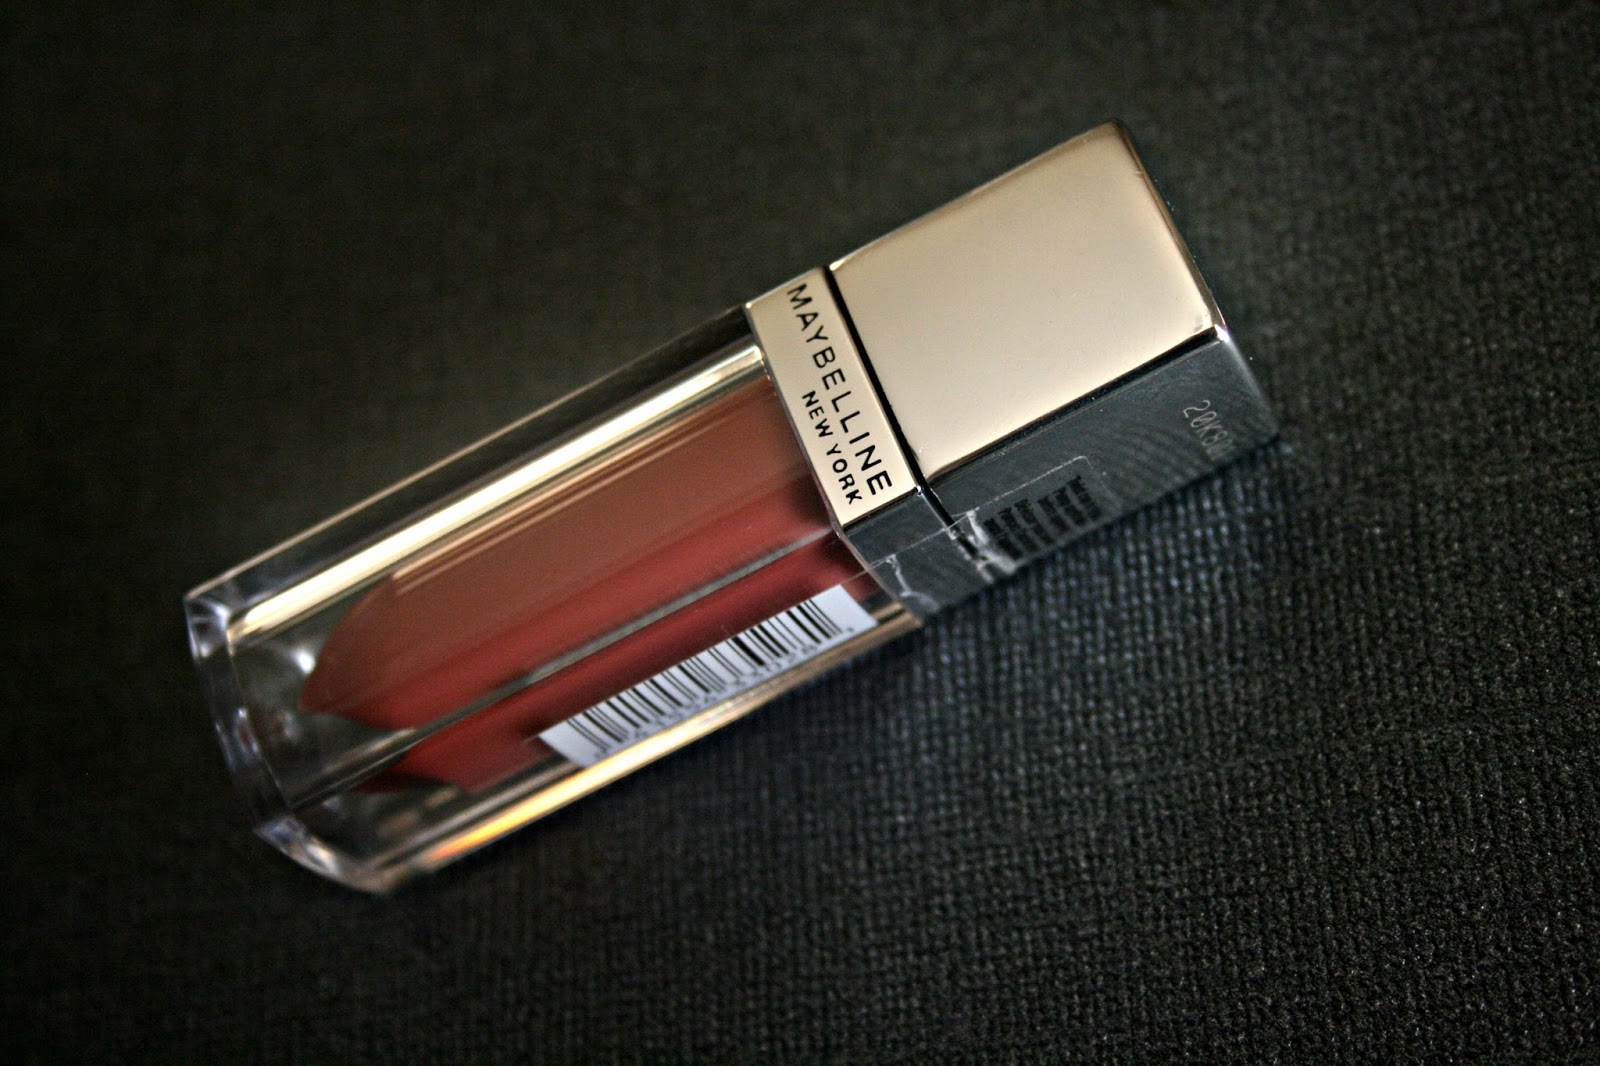 Maybelline New York Color Elixir in Caramel Infused Review, Photos & Swatches